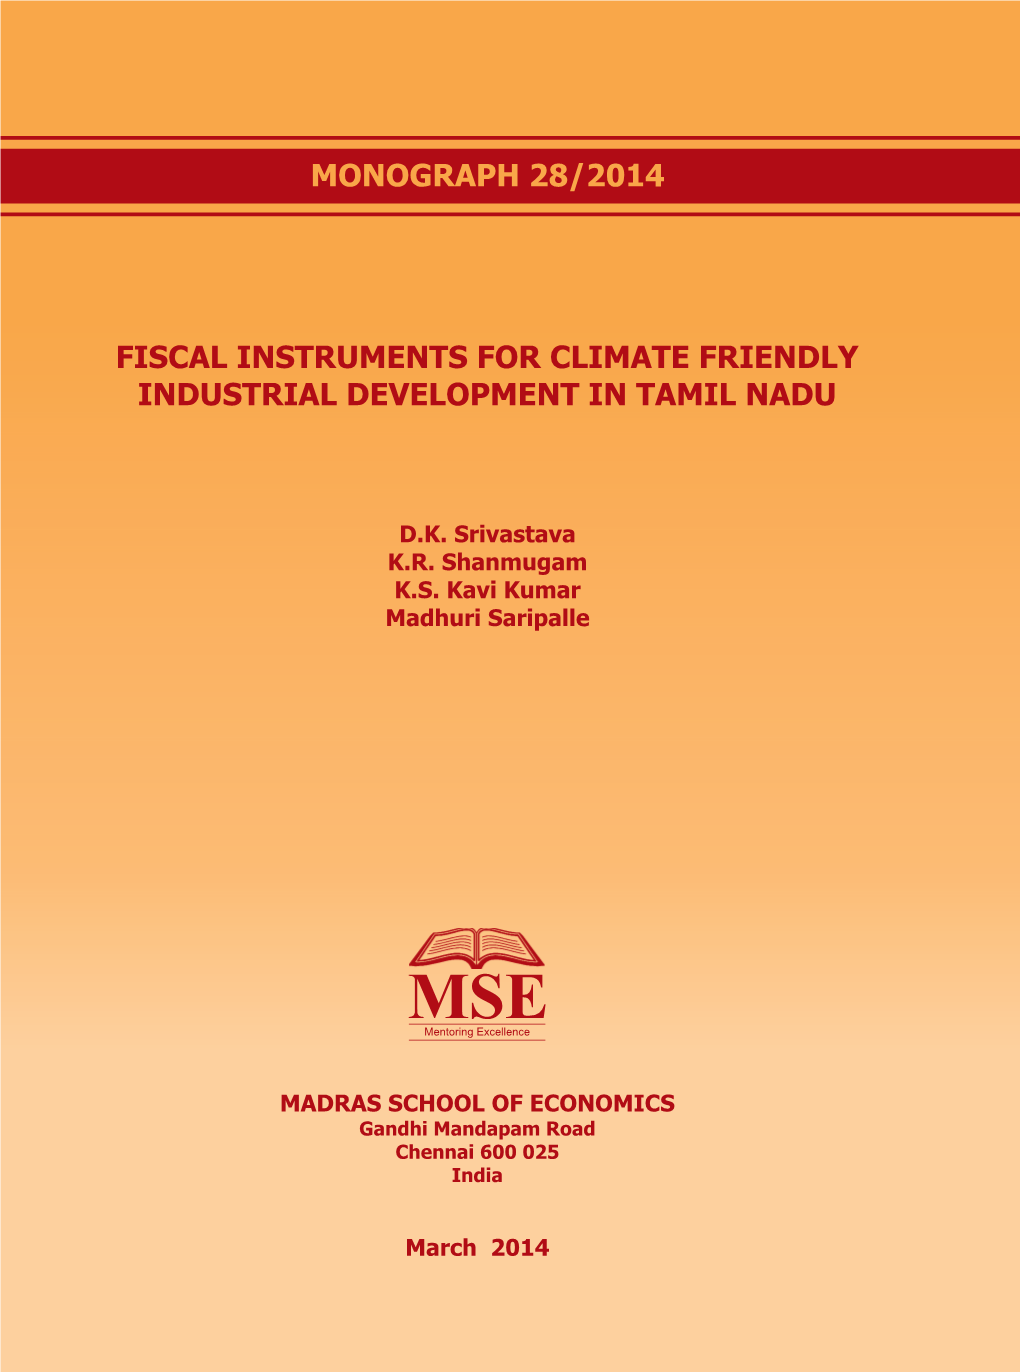 Fiscal Instruments for Climate Friendly Industrial Development in Tamil Nadu